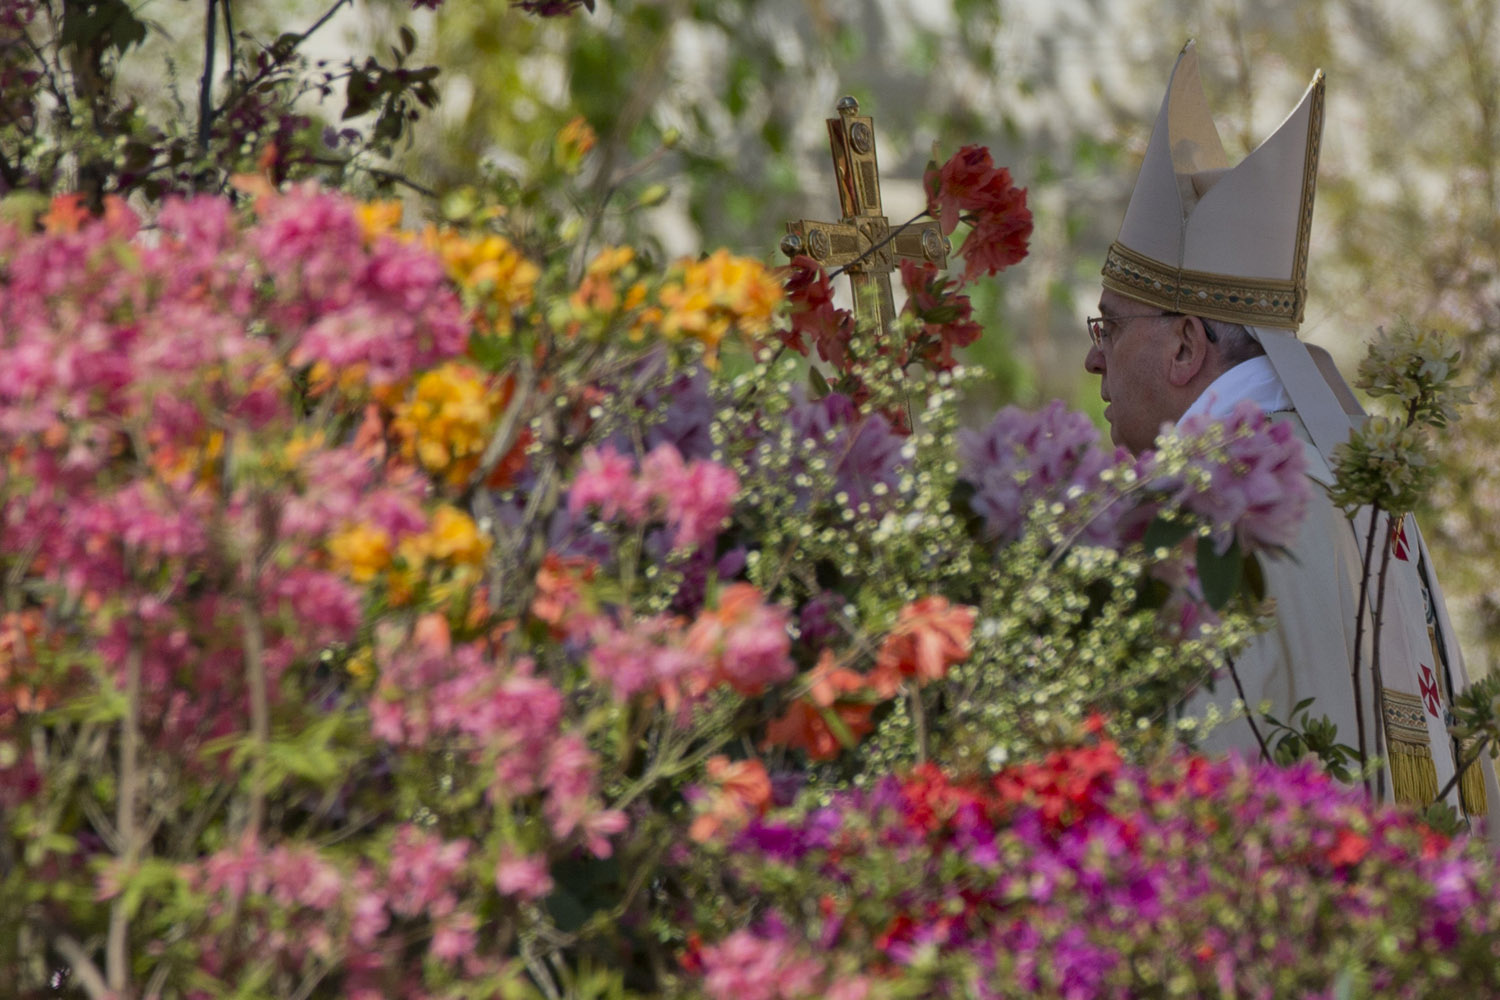 Apr. 20, 2014. Flowers from the Netherlands decorate St. Peter's Square as Pope Francis arrives to celebrate an Easter Mass in St. Peter's Square at the the Vatican.